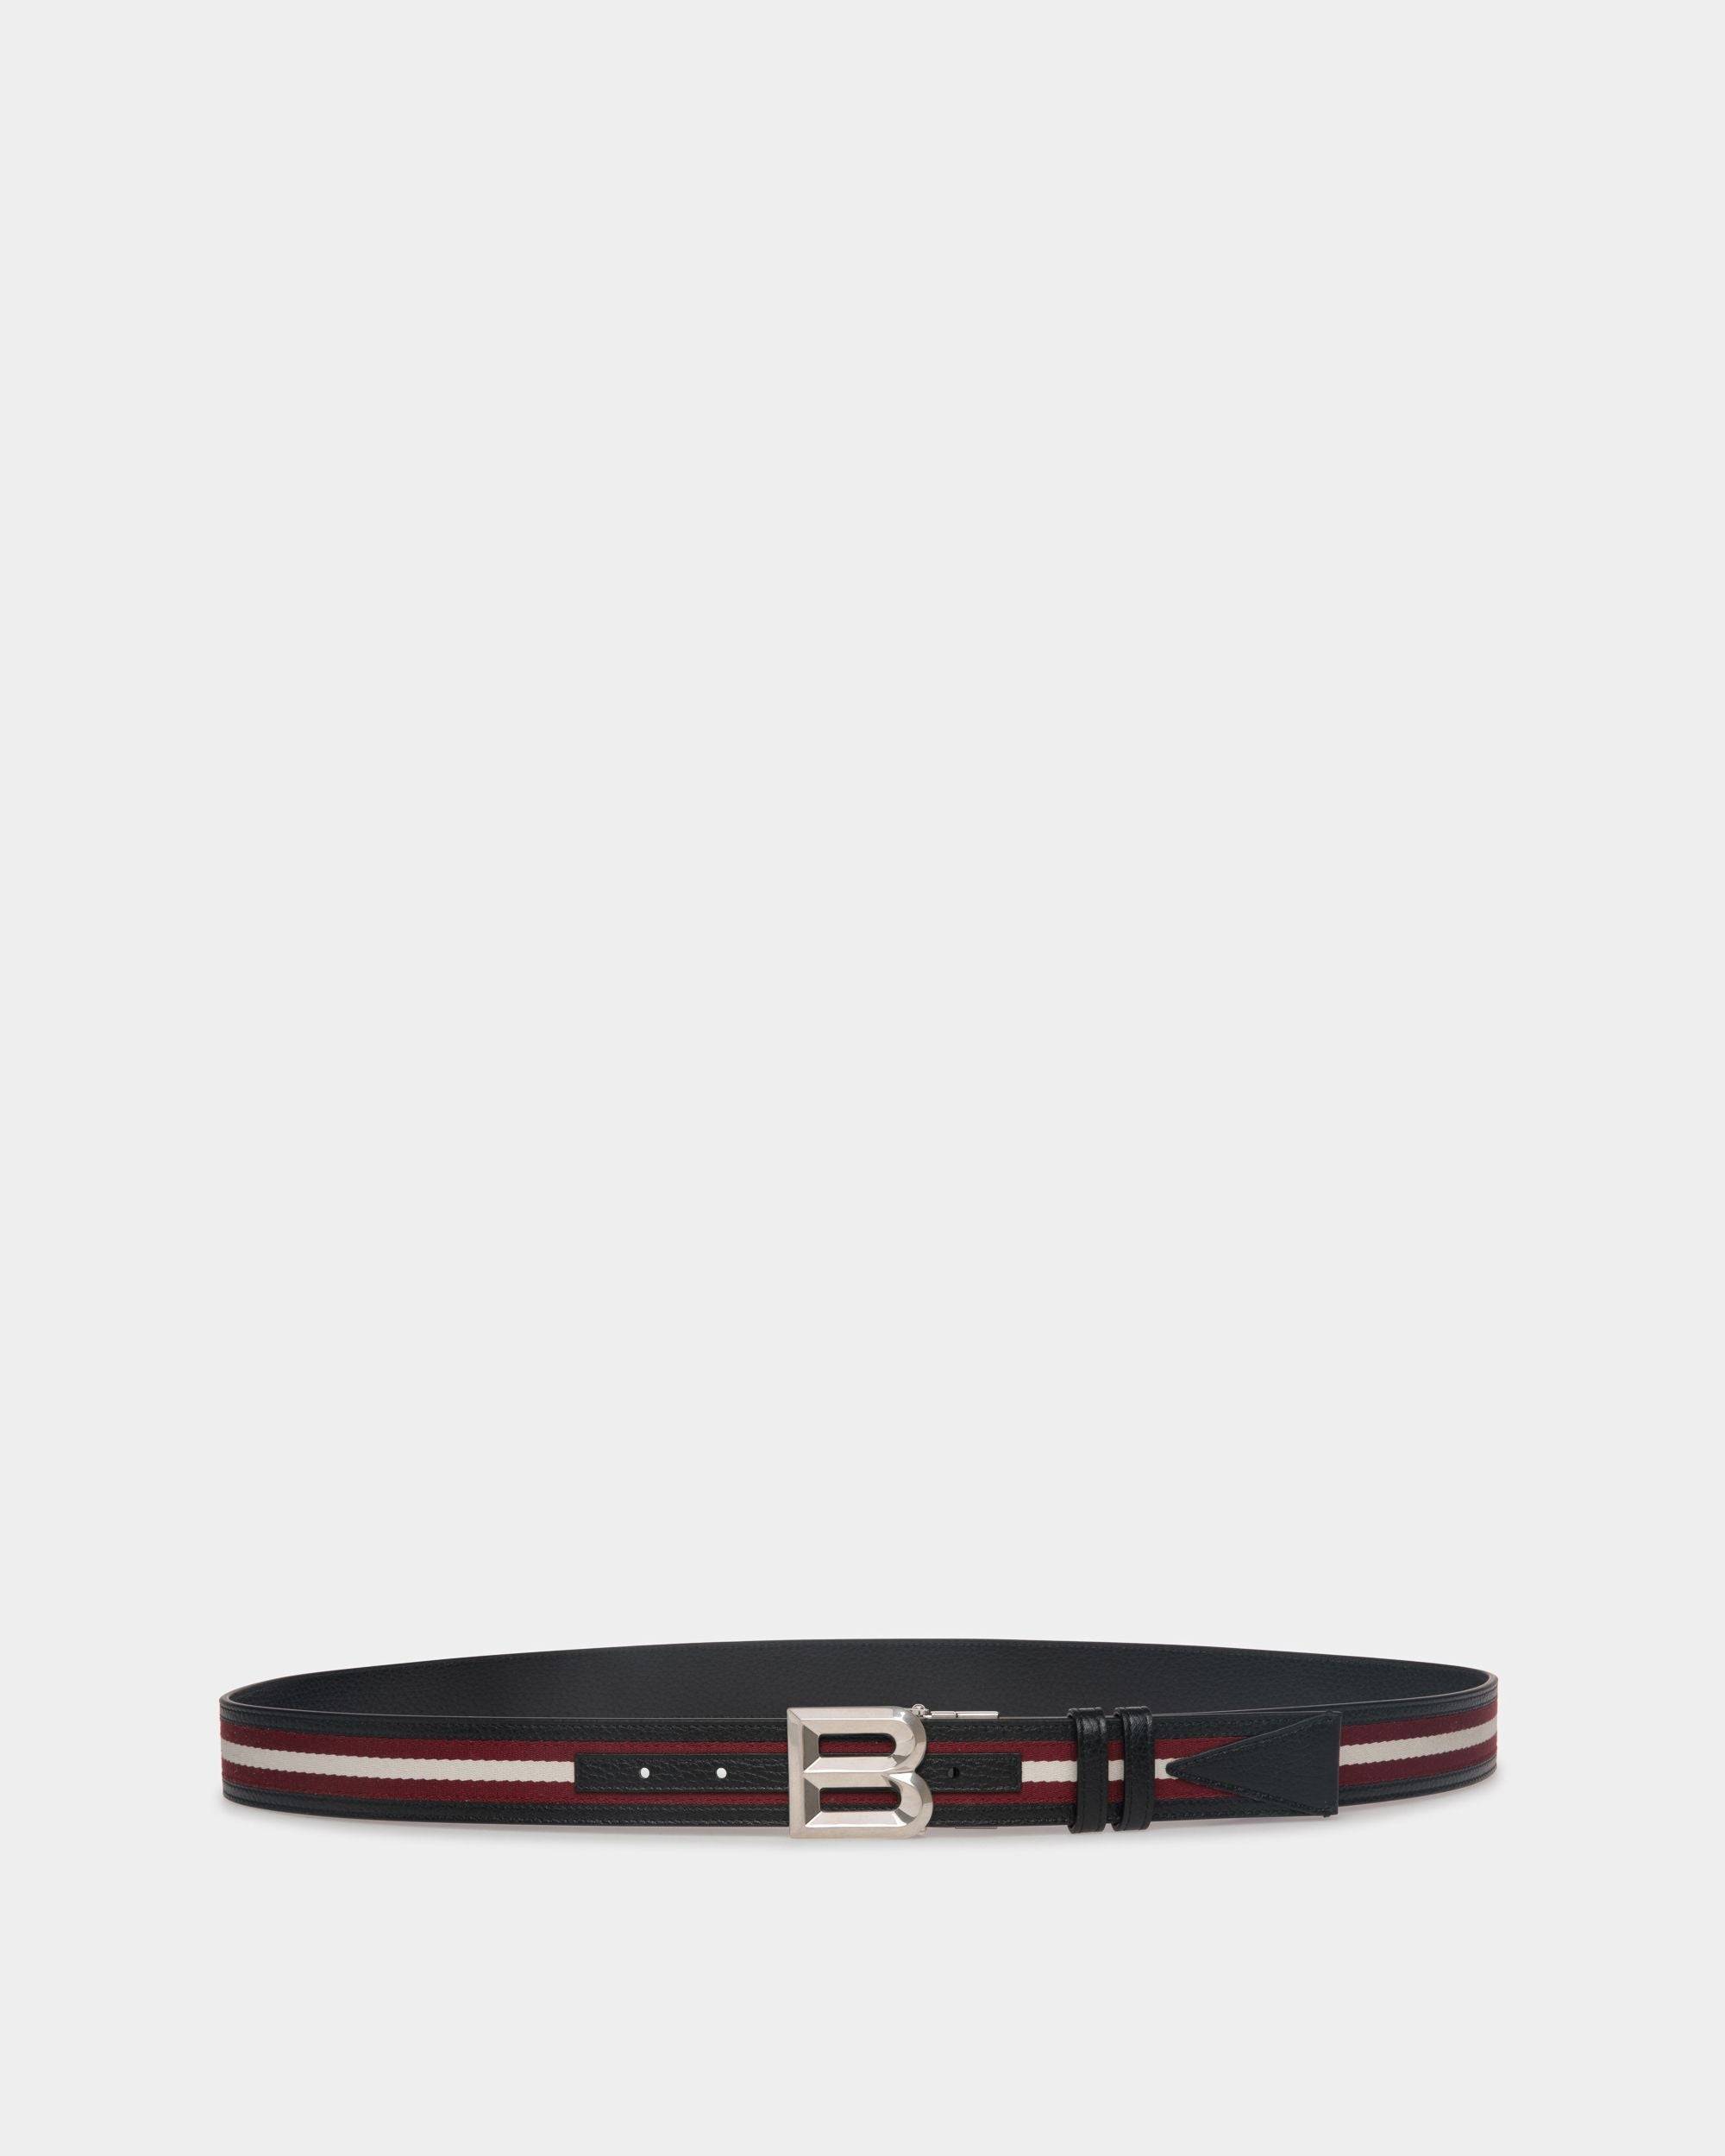 B Bold 35mm | Men's Reversible Belt in Red White Red Fabric And Leather | Bally | Still Life Front